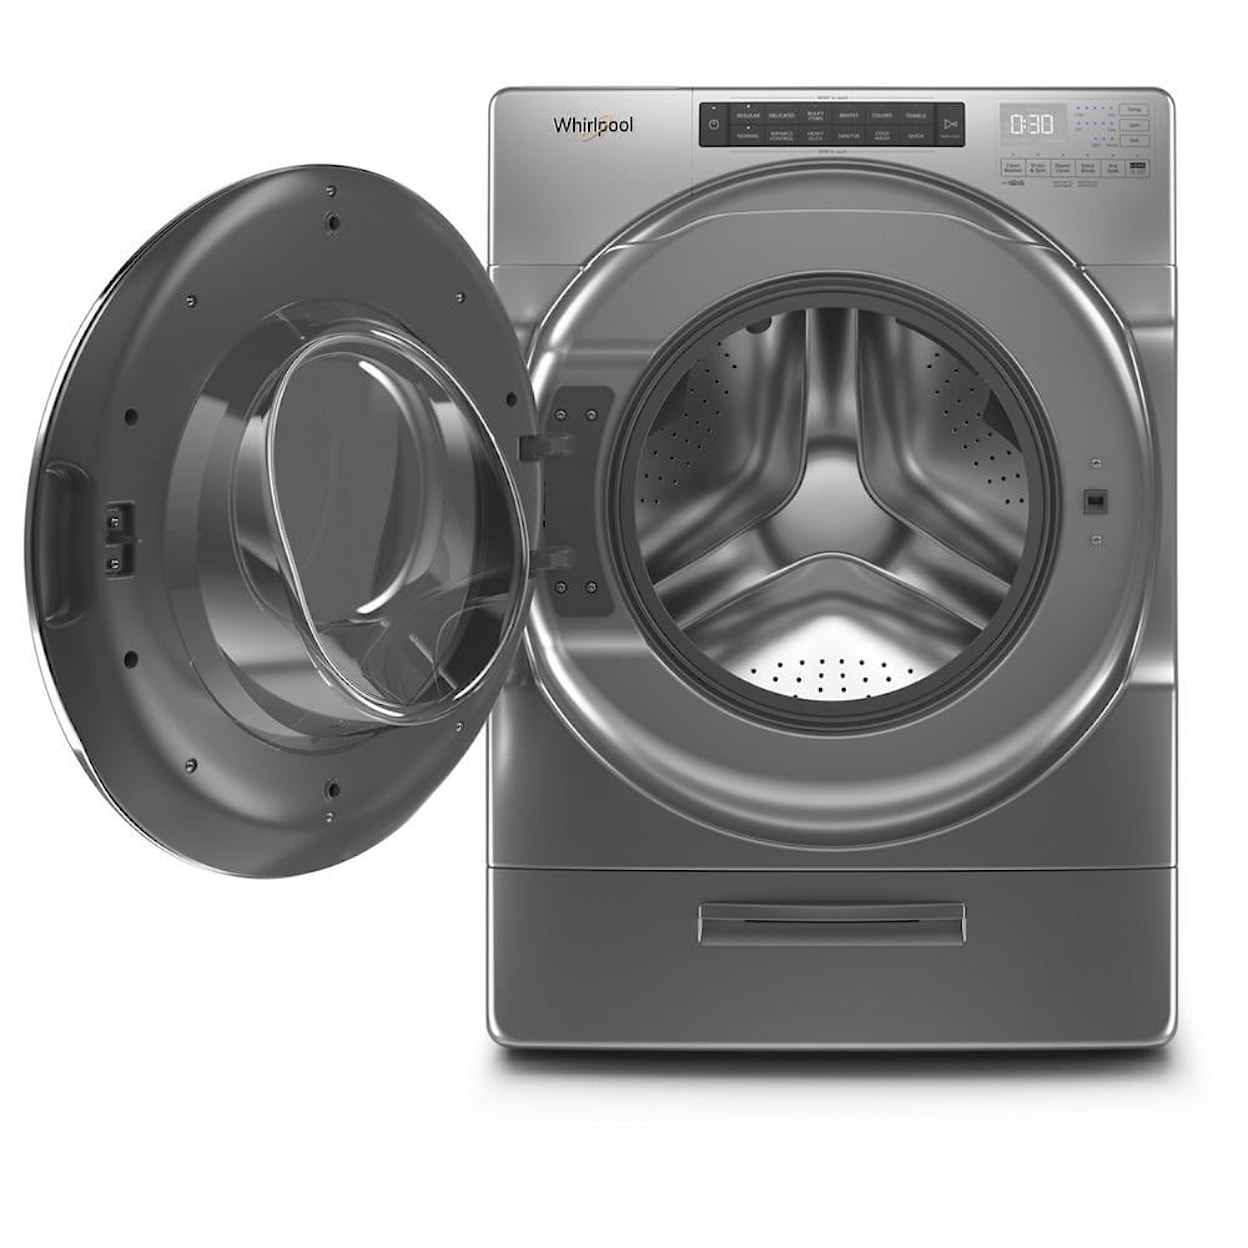 Whirlpool Laundry Front Load Washer